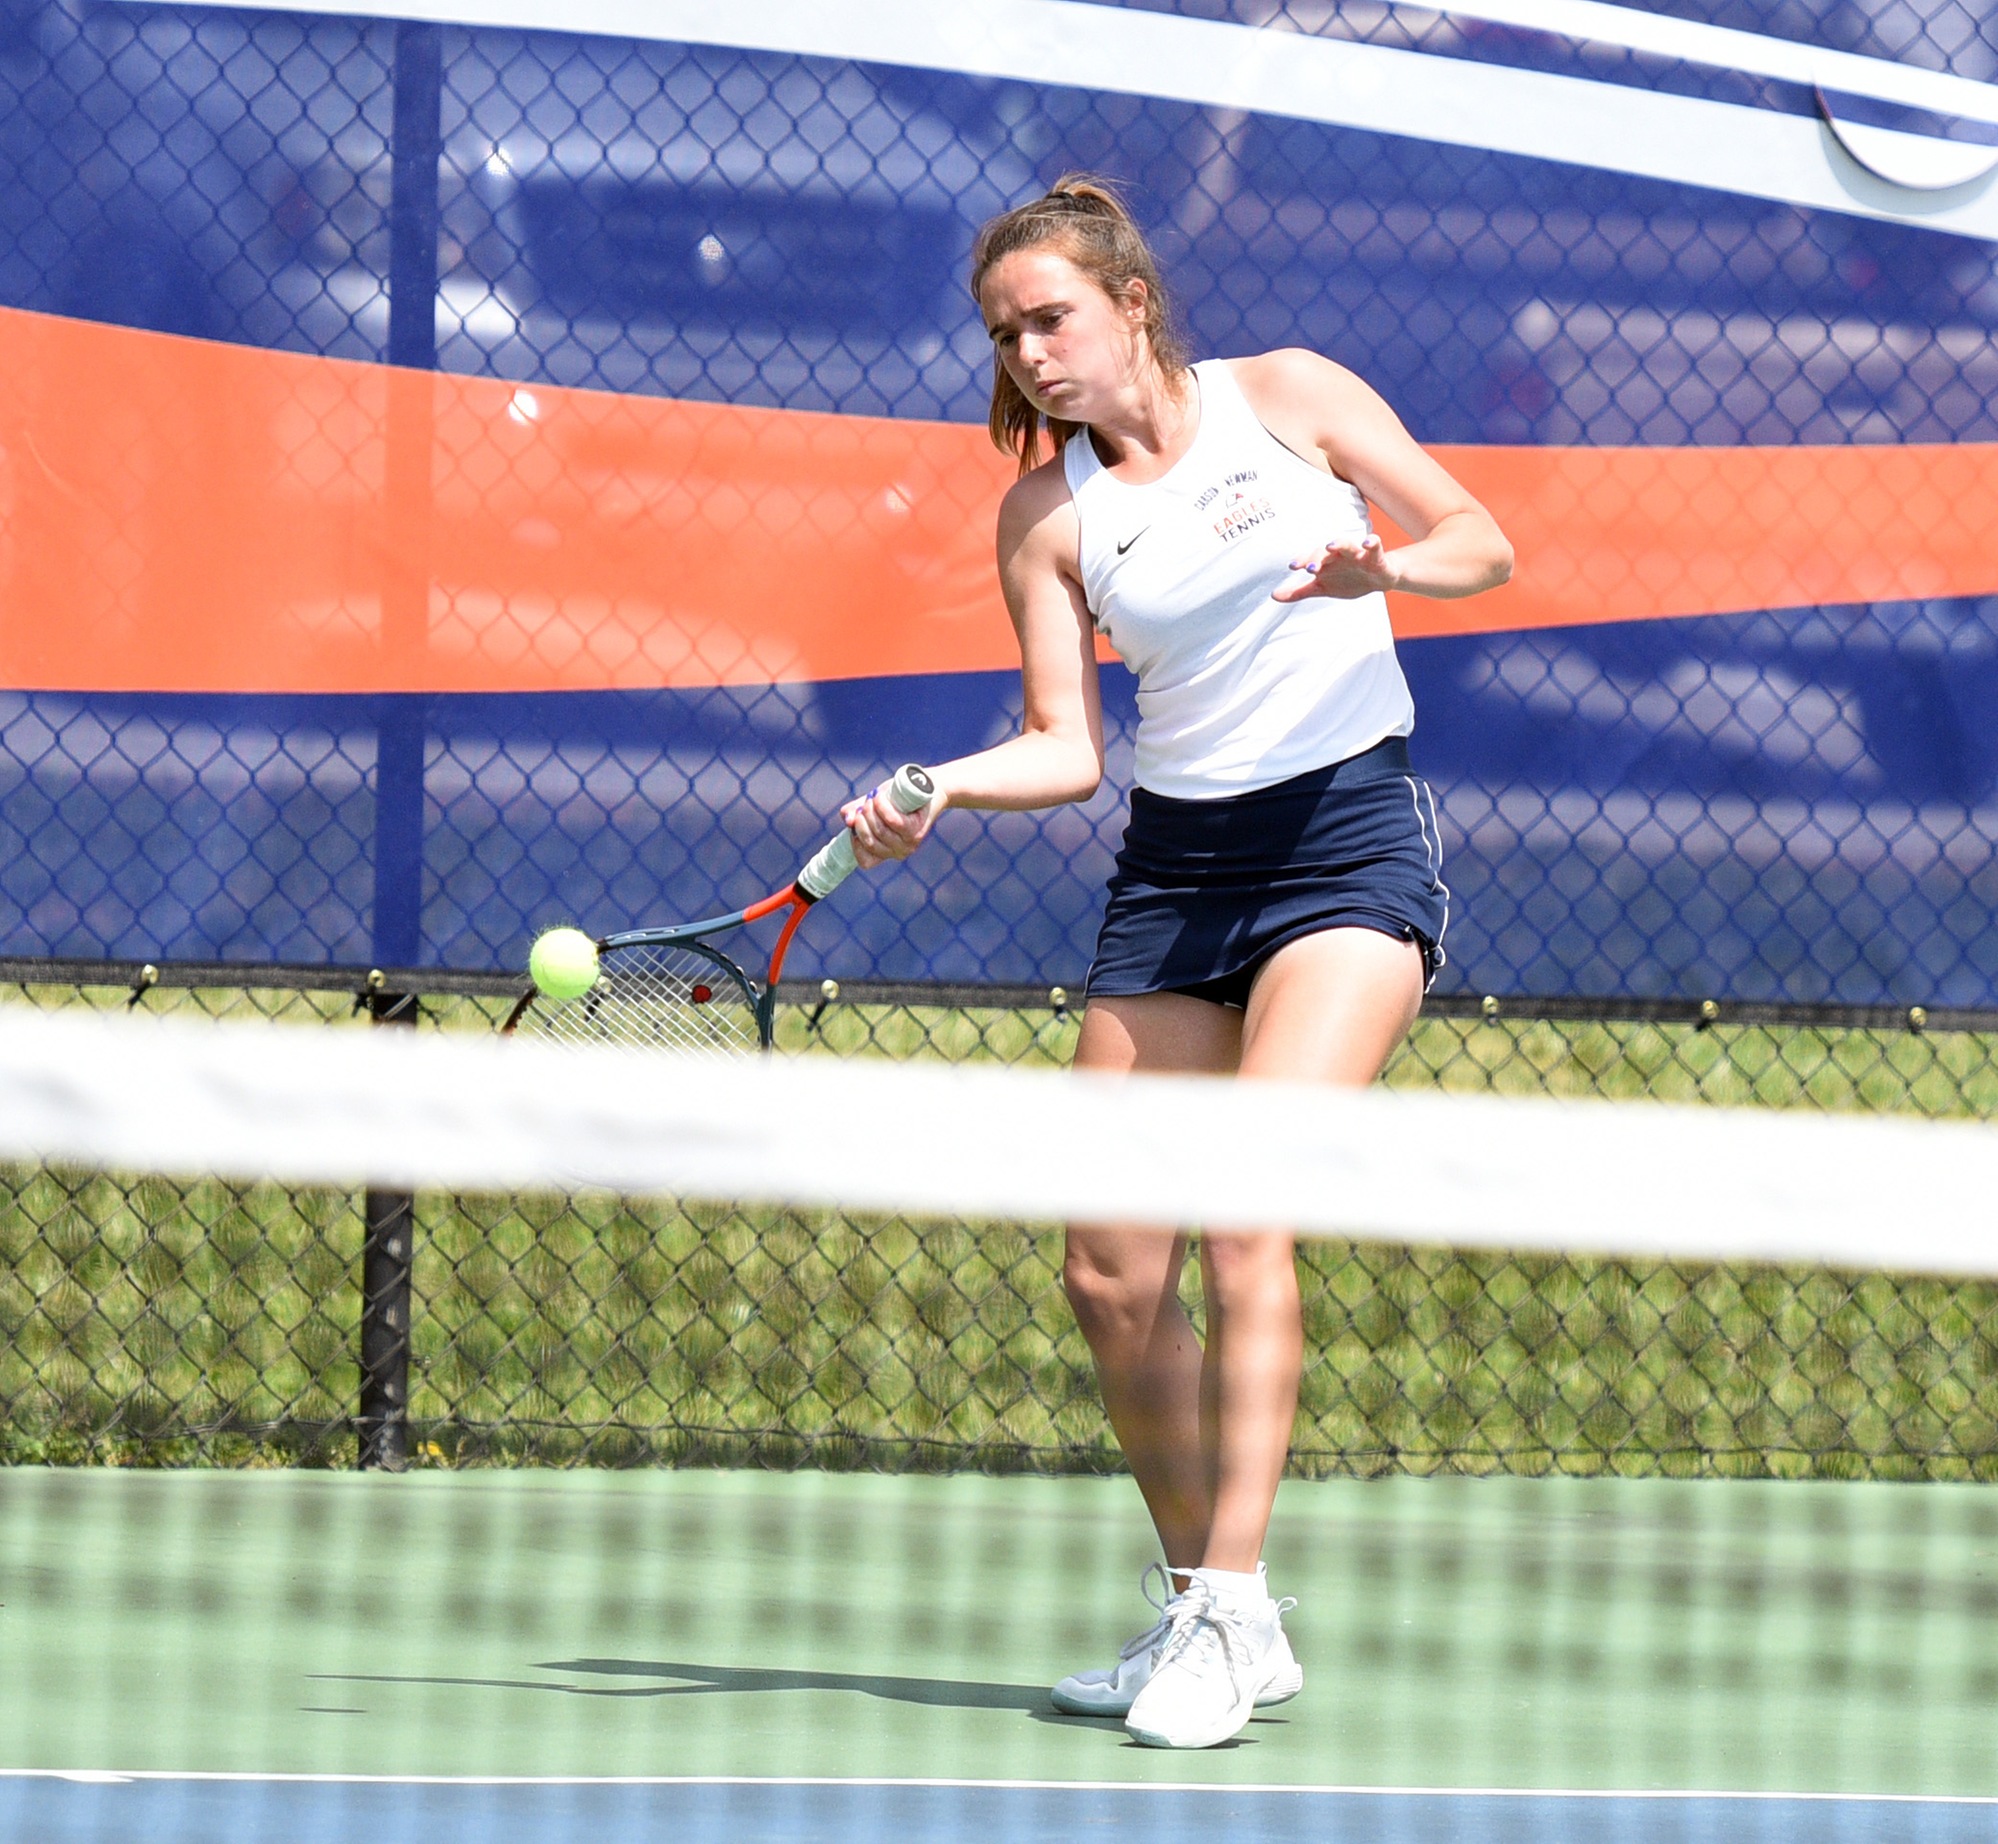 Carson-Newman has Successful Outing in Doubles Action at the Eagle Invitational